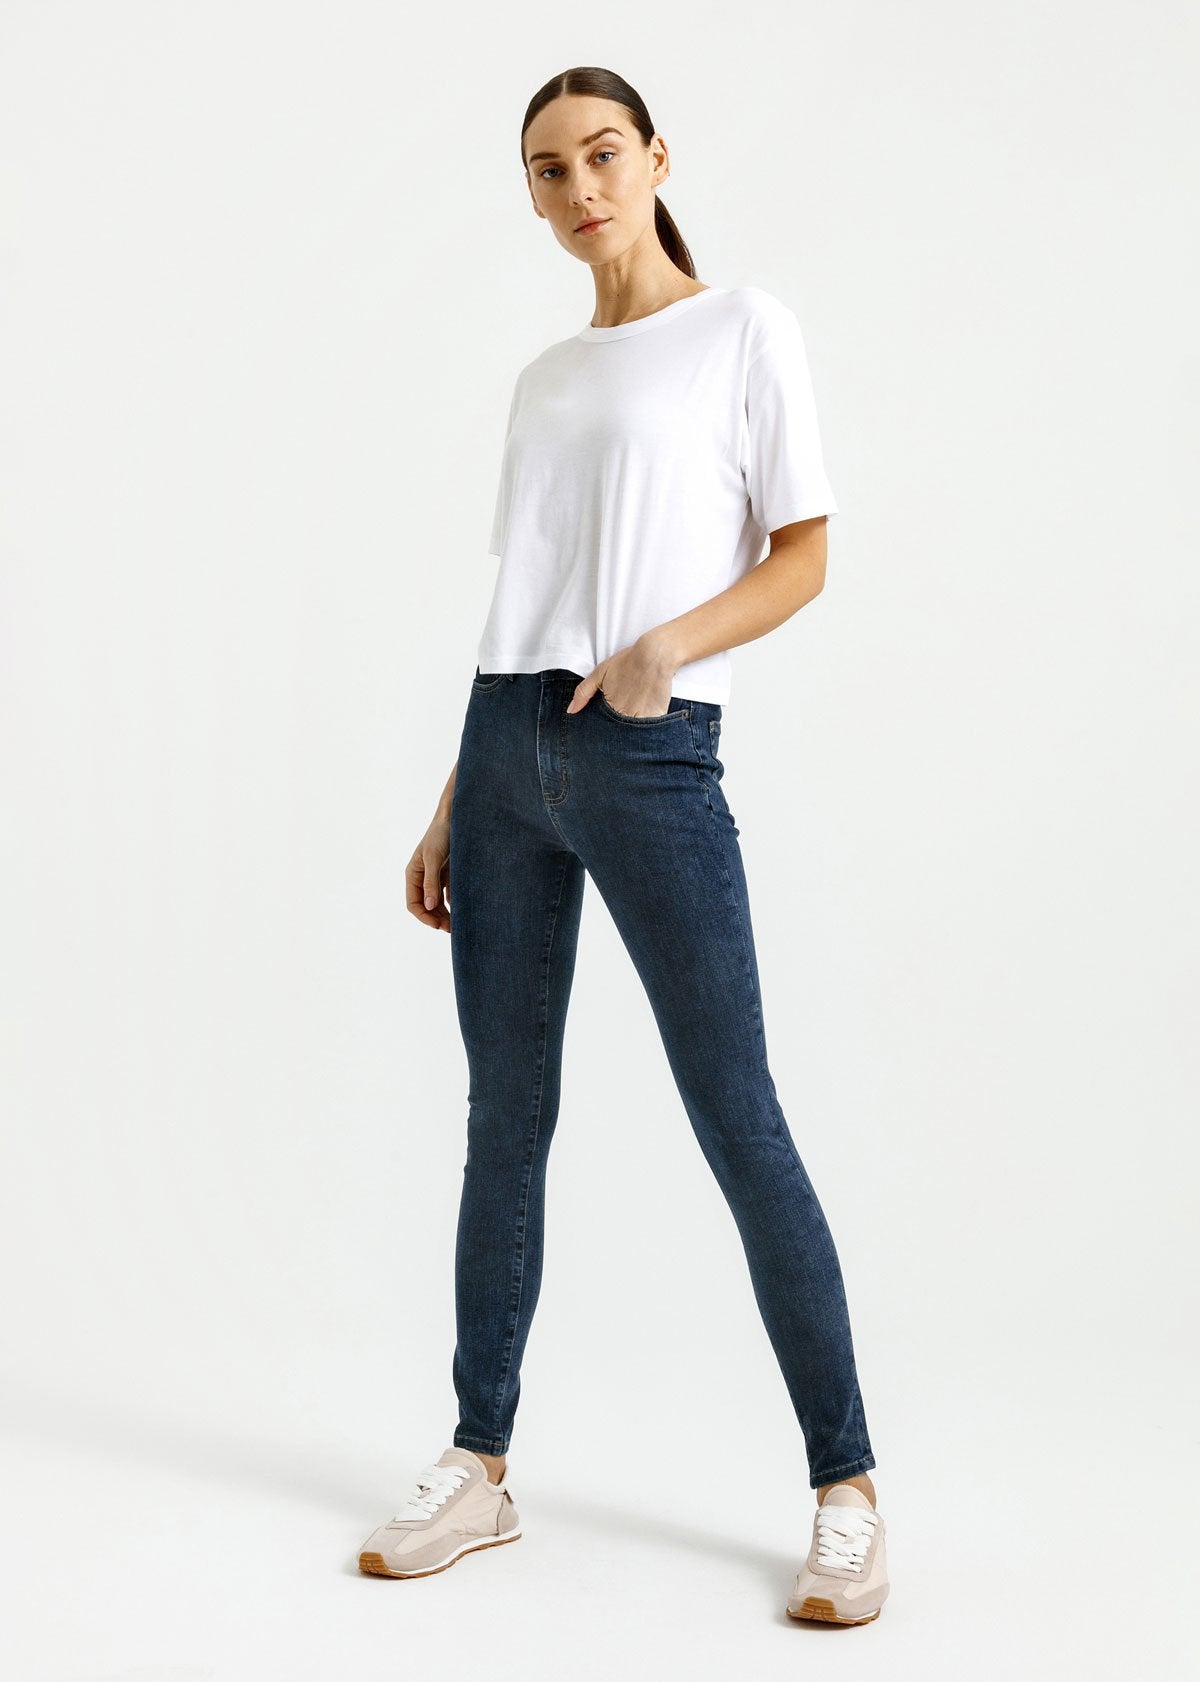 Breathe Easy Because High-Waisted Jeans Are on the Rise